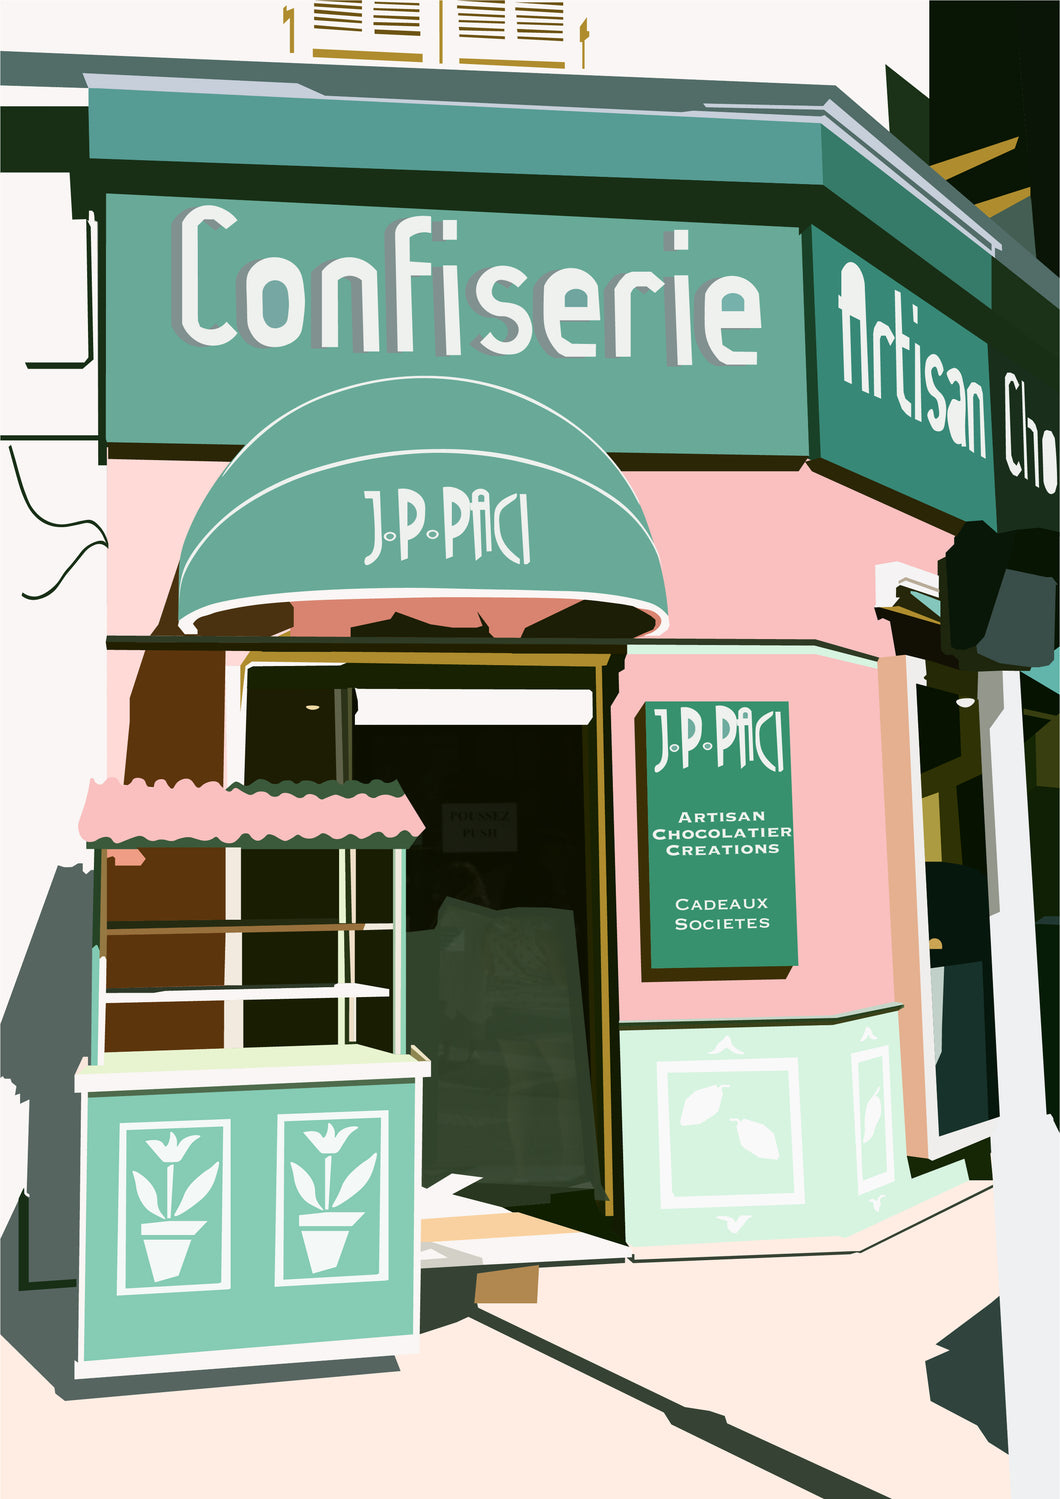 Patisseries in South of France, Art Print